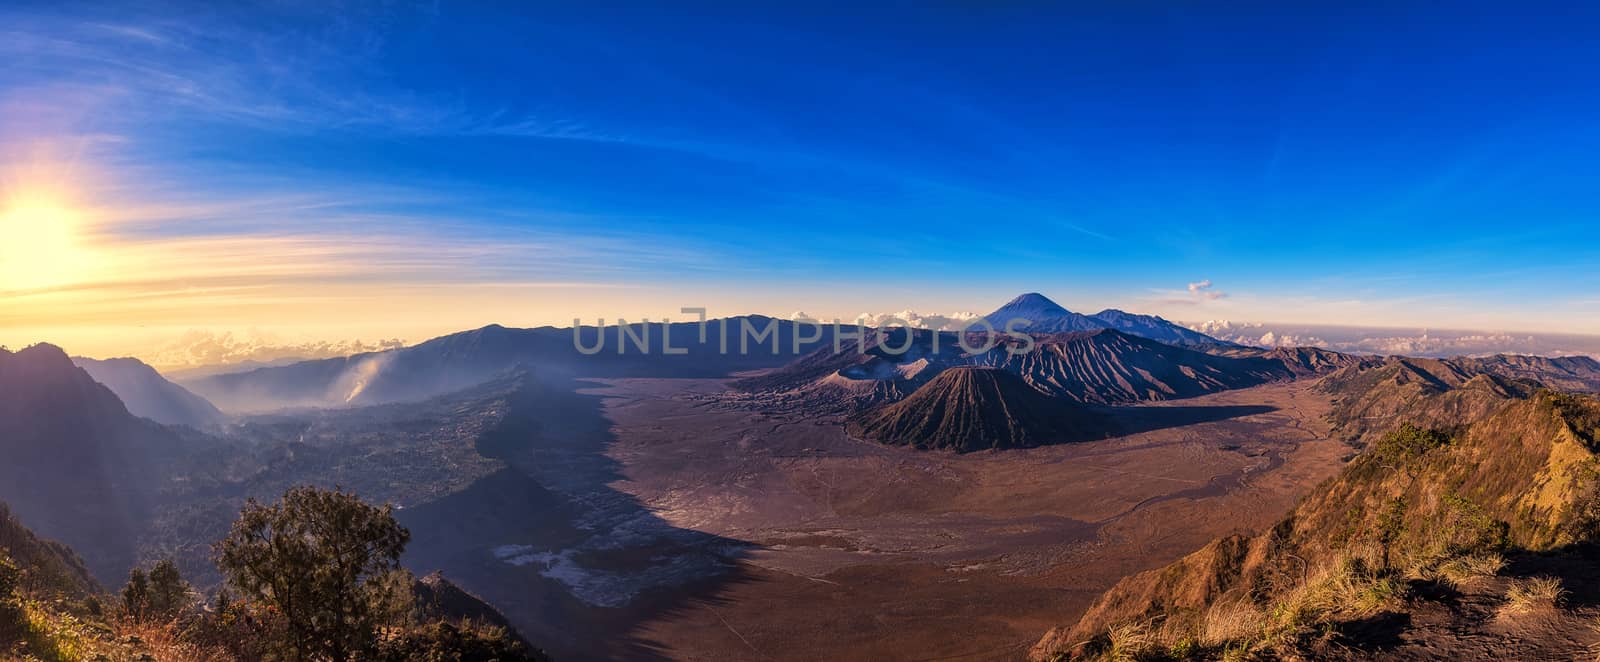 Sunrise at Mount Bromo volcano beautiful landscape landmark and popular destinations, the magnificent view of Mt. Bromo located in Bromo Tengger Semeru National Park, East Java, Indonesia.